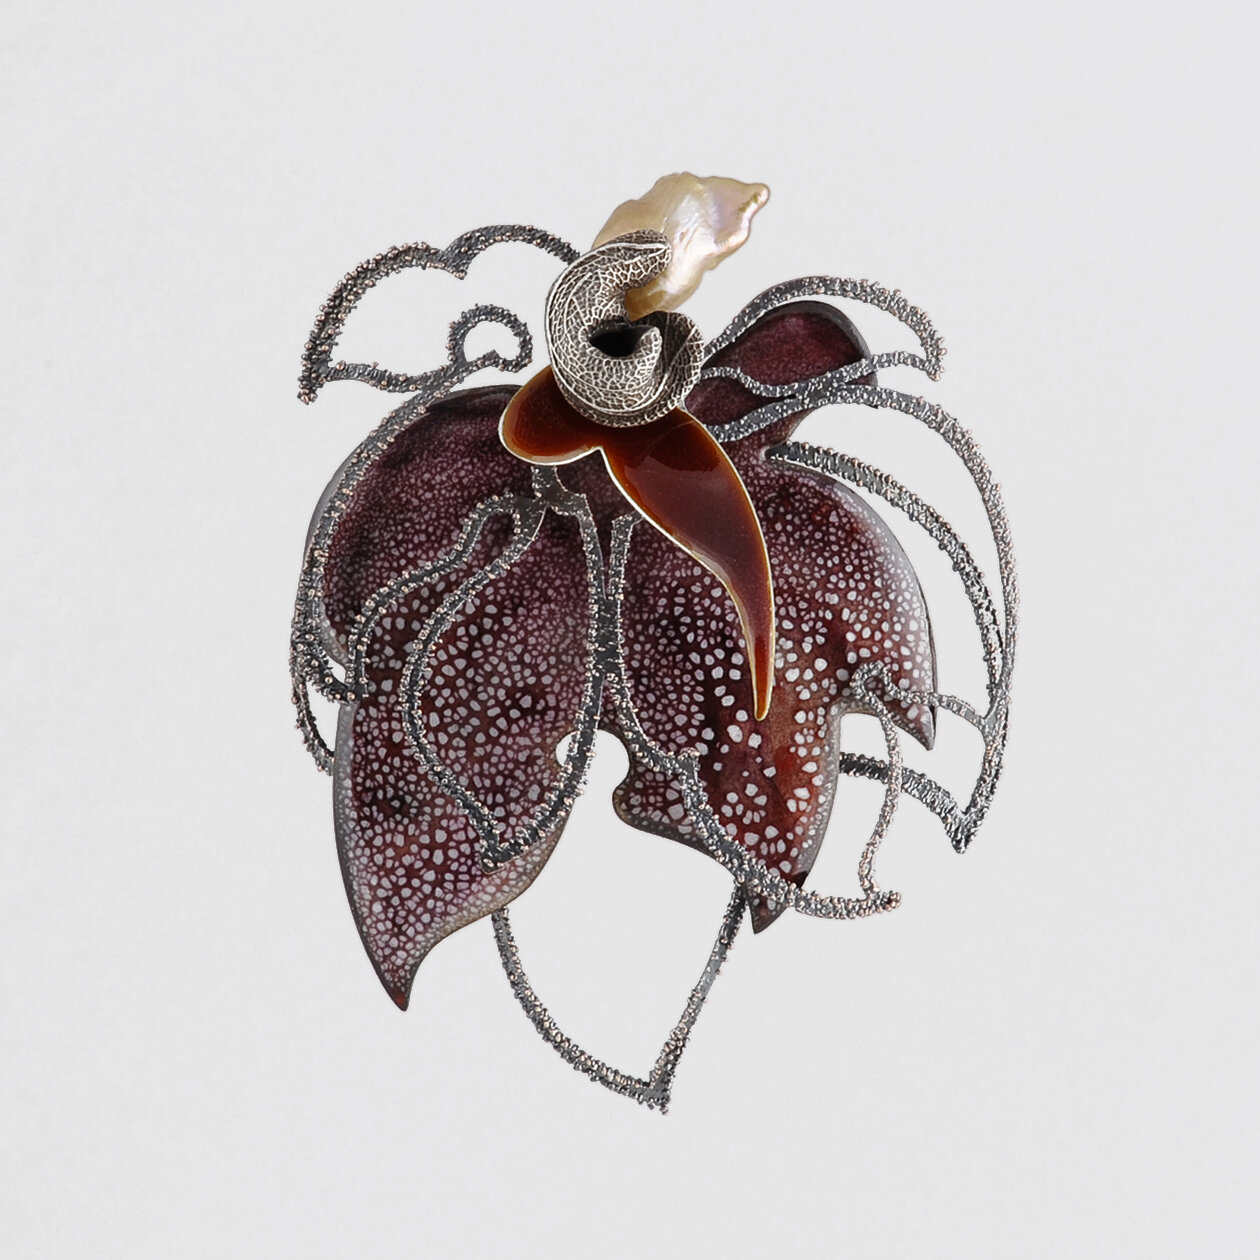 Ruby Rosette  Brooch RB218   |   2018   |   sterling silver, copper, pearl, enamel   |   4 x 3 x 1 inches   